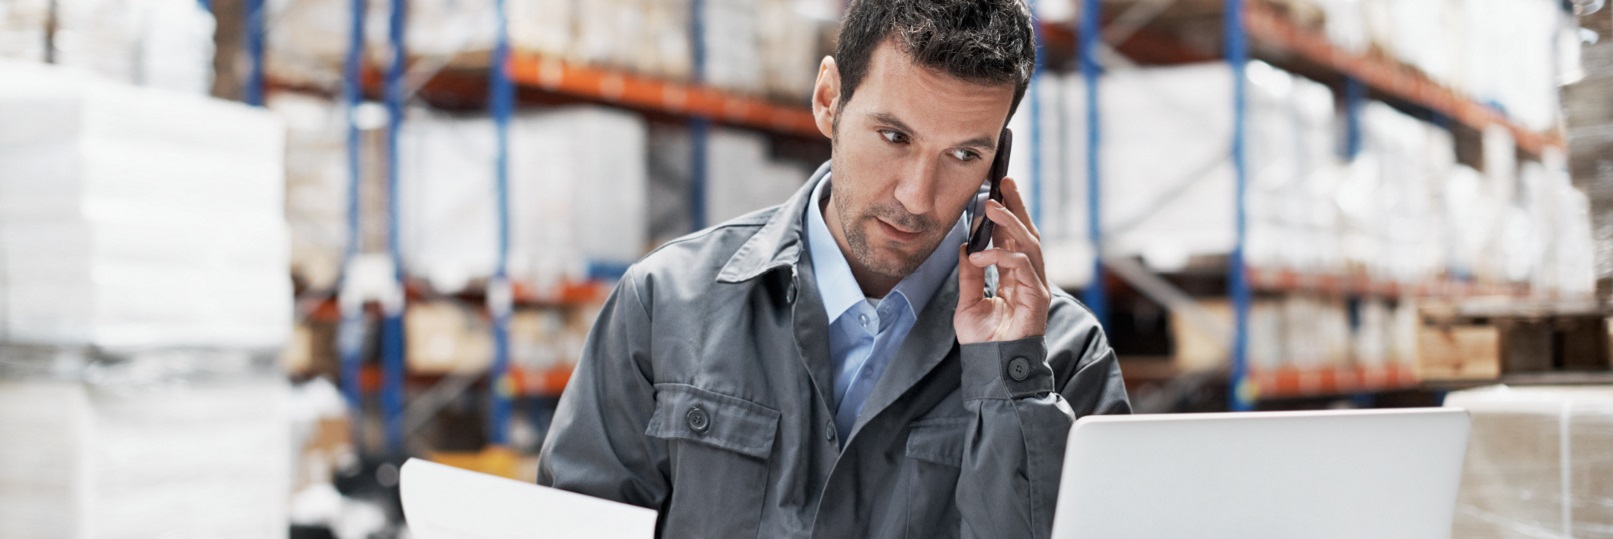 man in warehouse on phone at computer